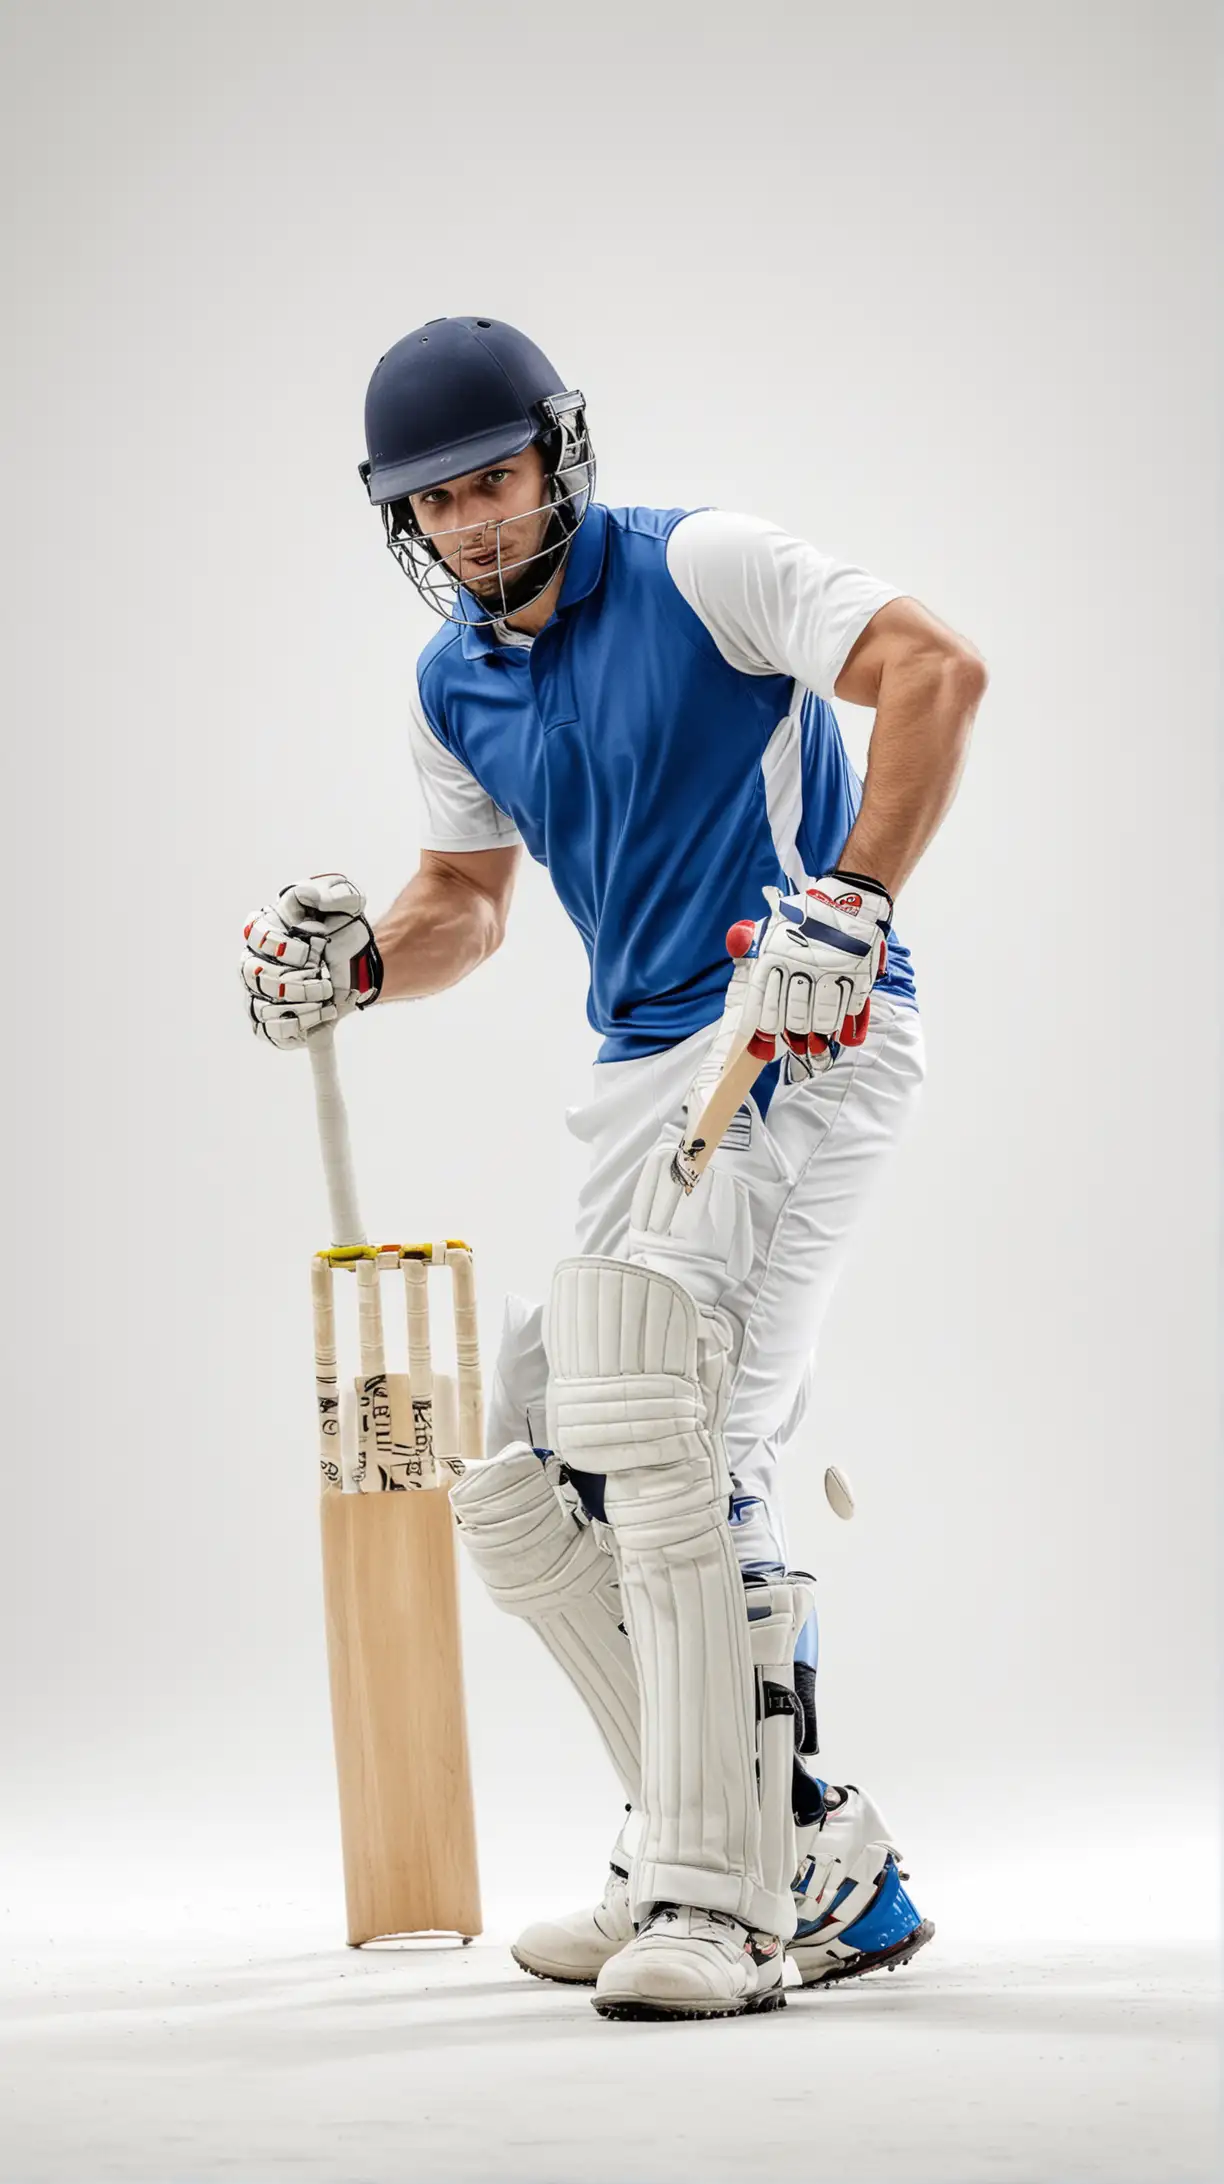 Cricket Player in Action on White Background